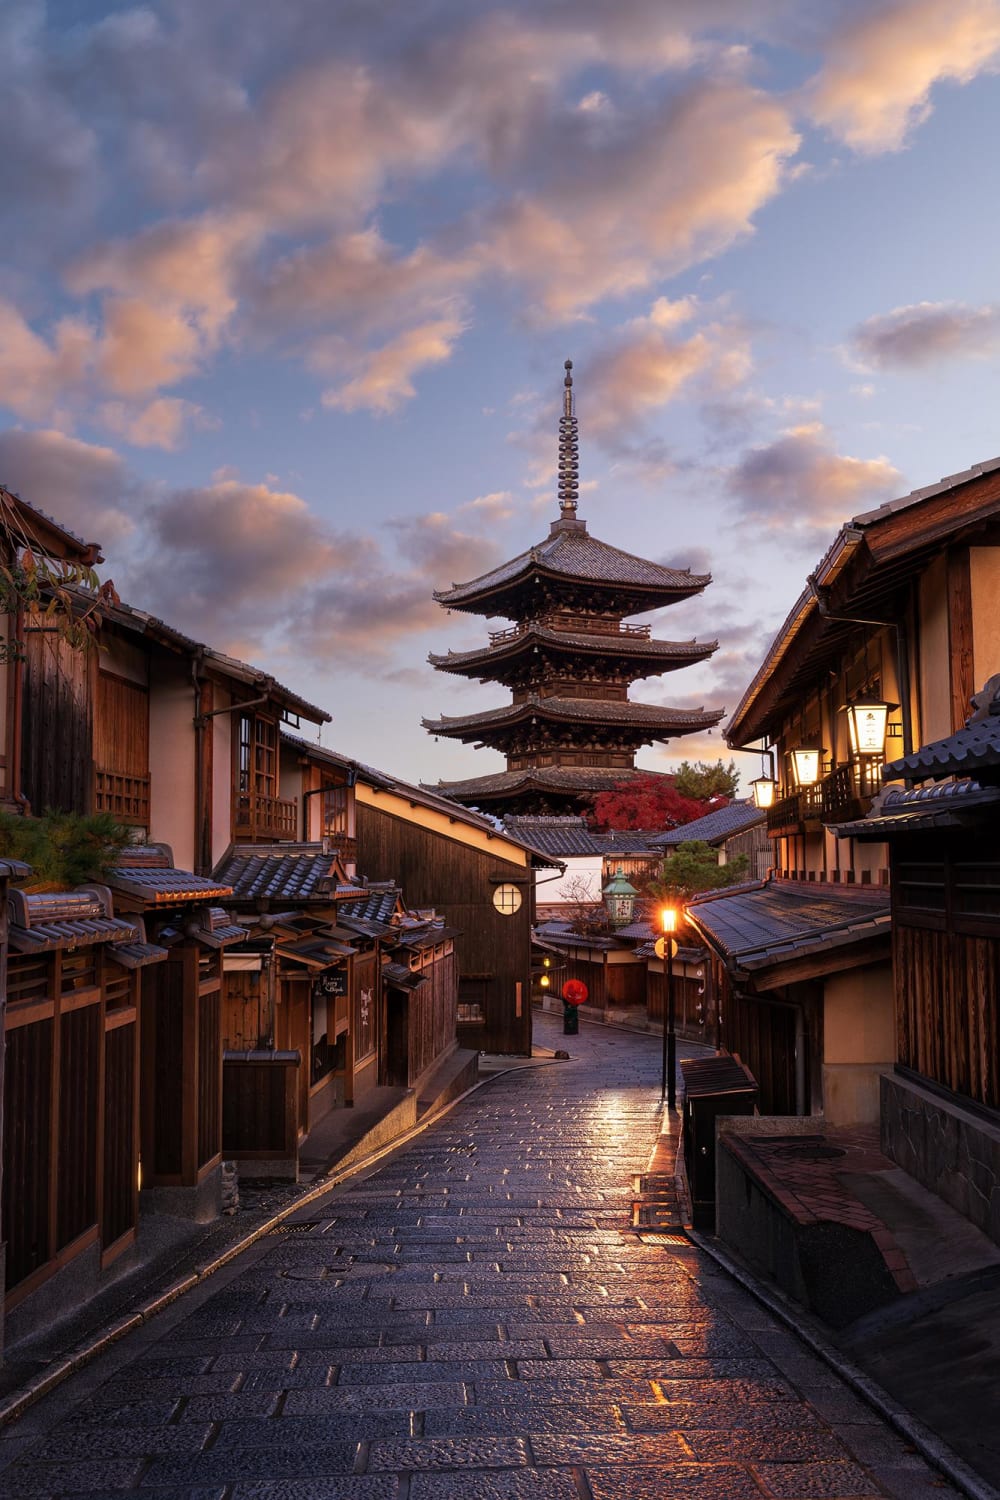 First light on beautiful streets of Kyoto, Japan.